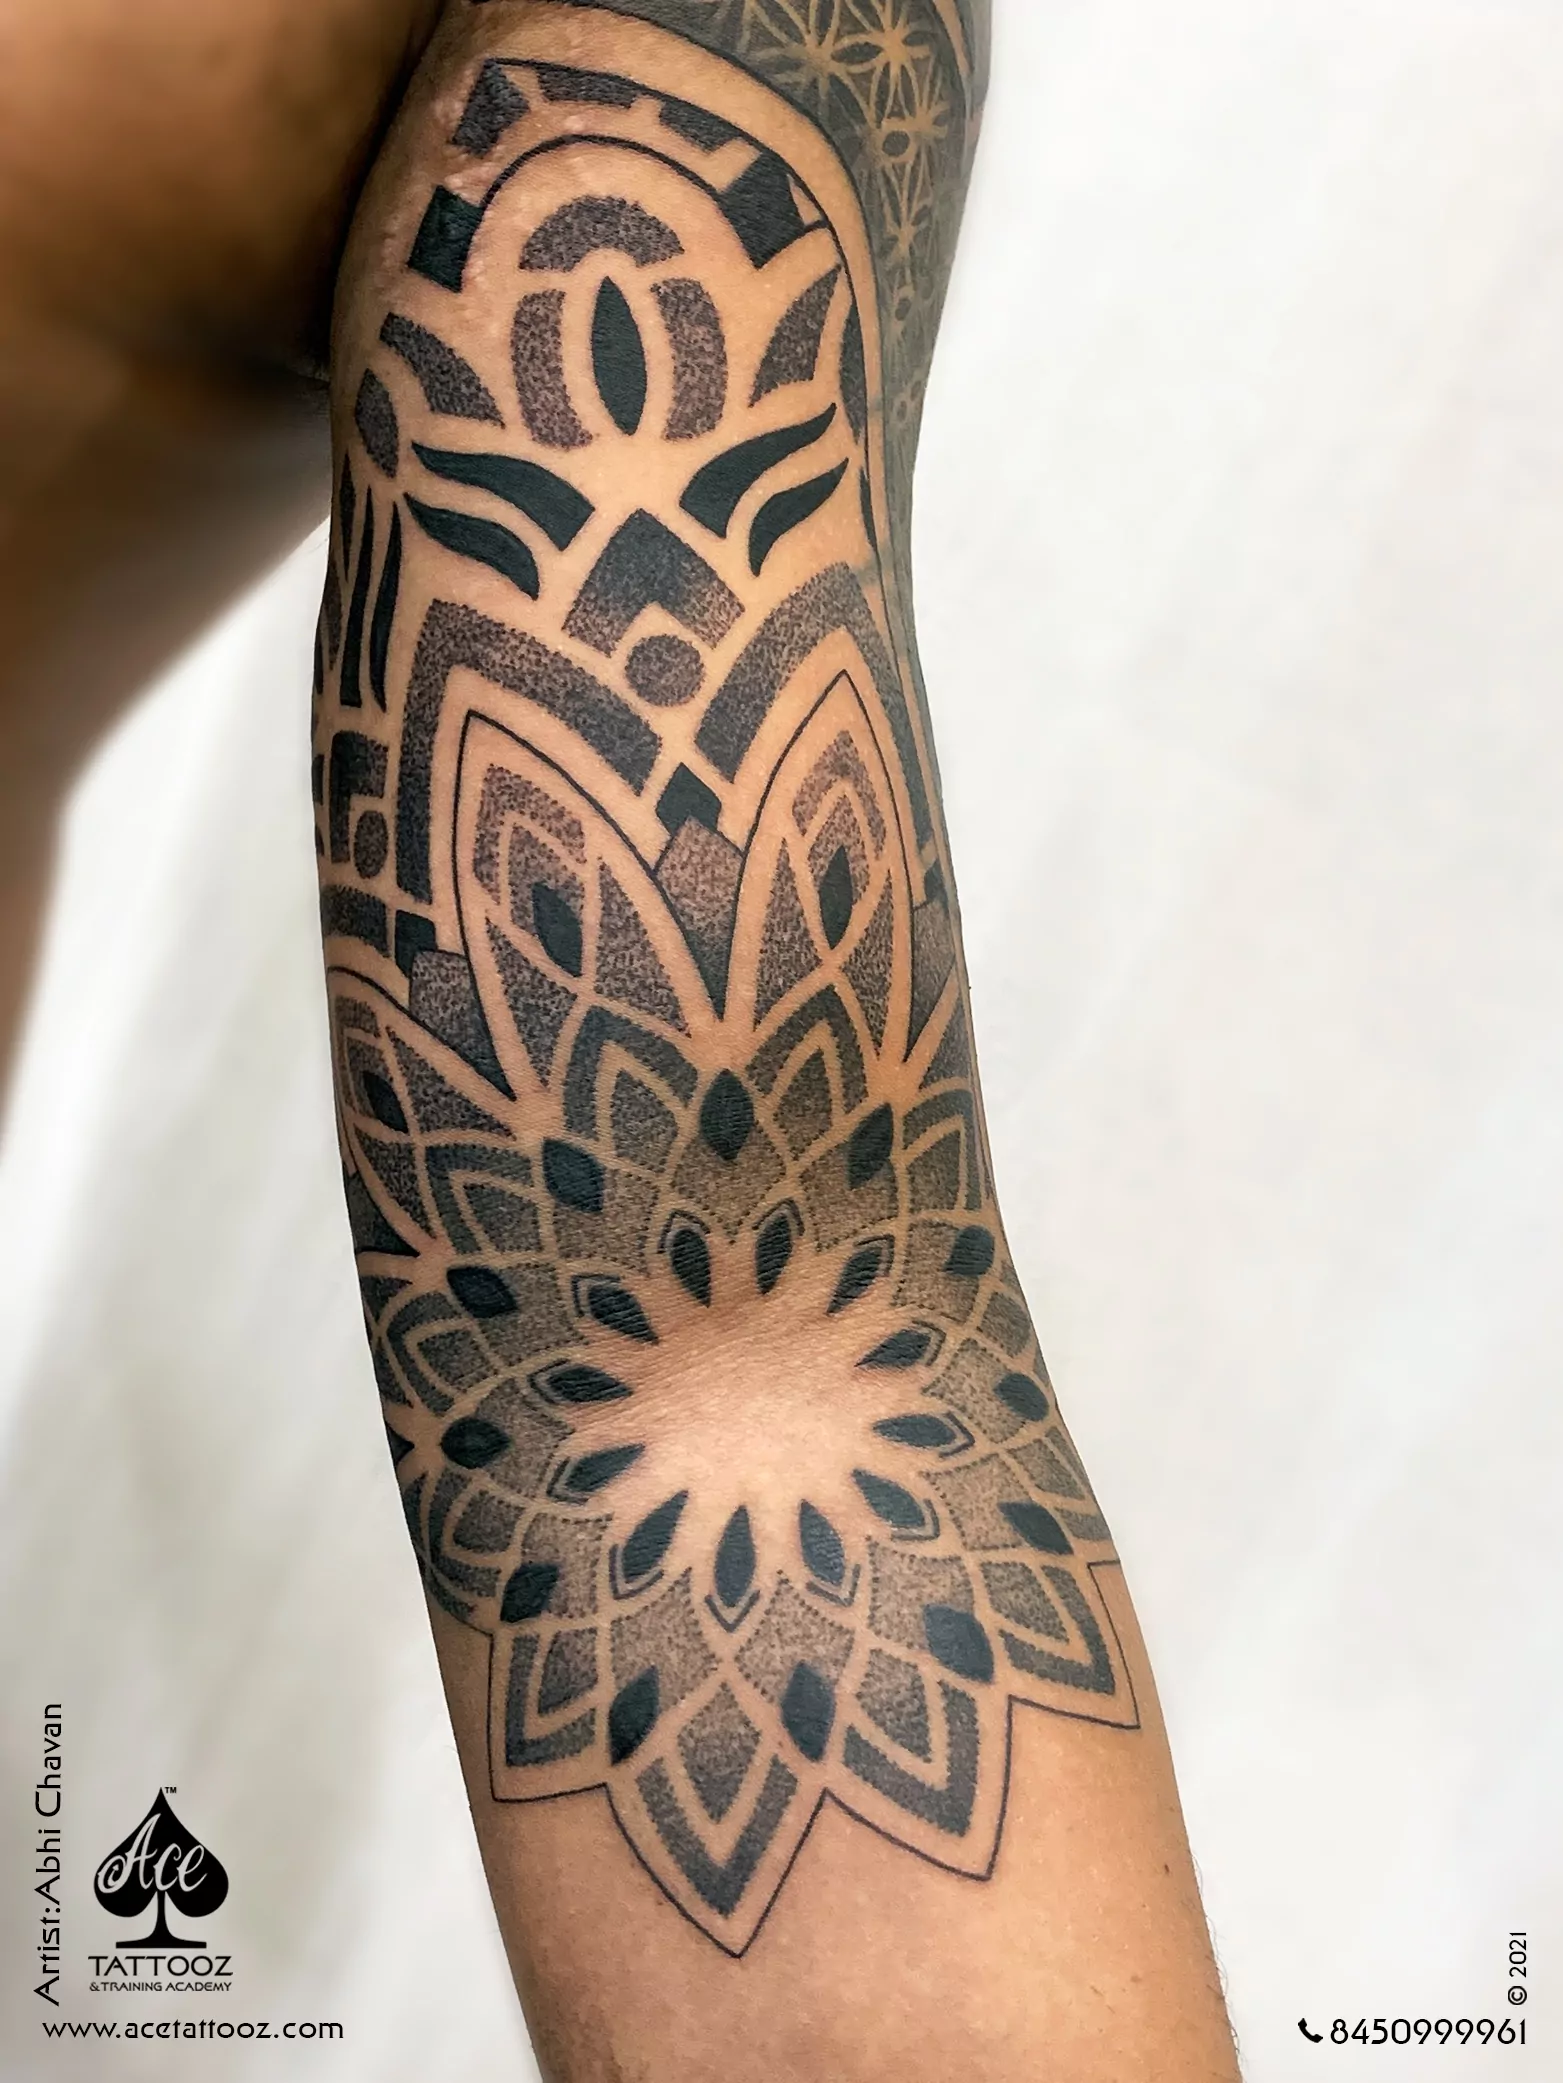 8 Interesting facts about dotwork tattoo